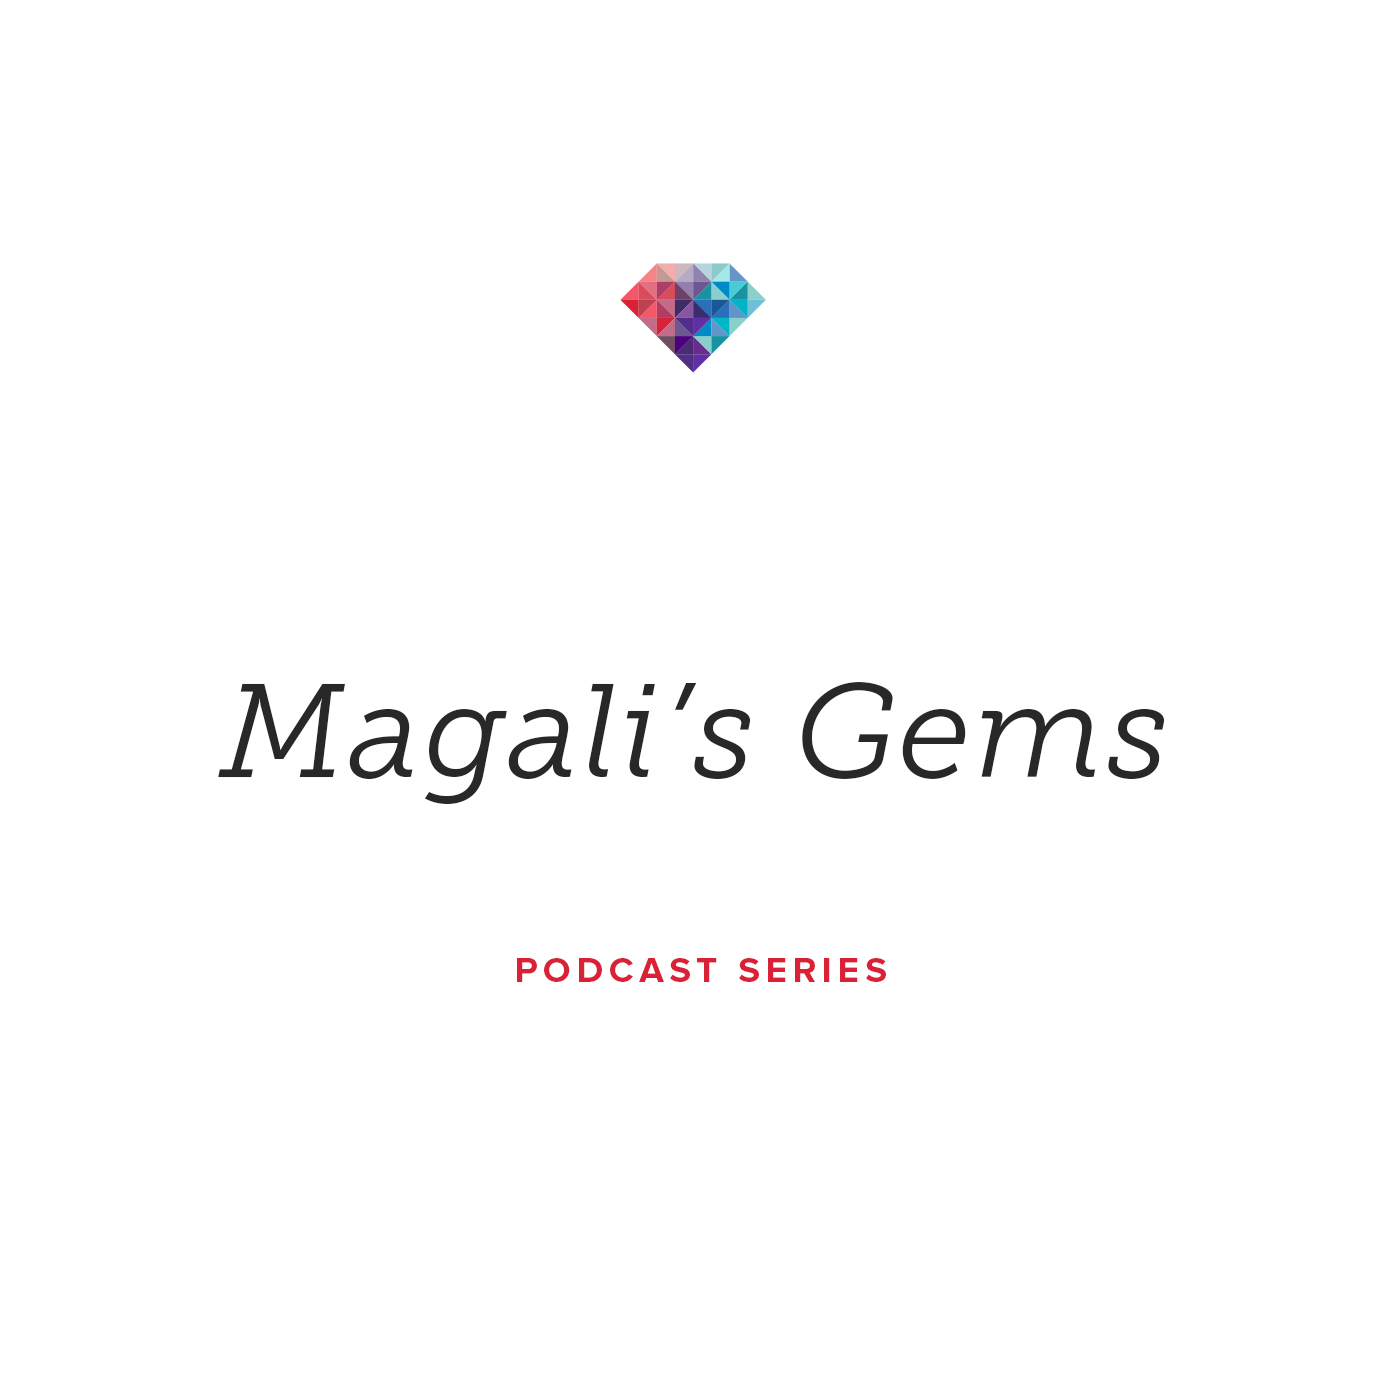 Intoducing Magali's Gems Podcast Episode 1